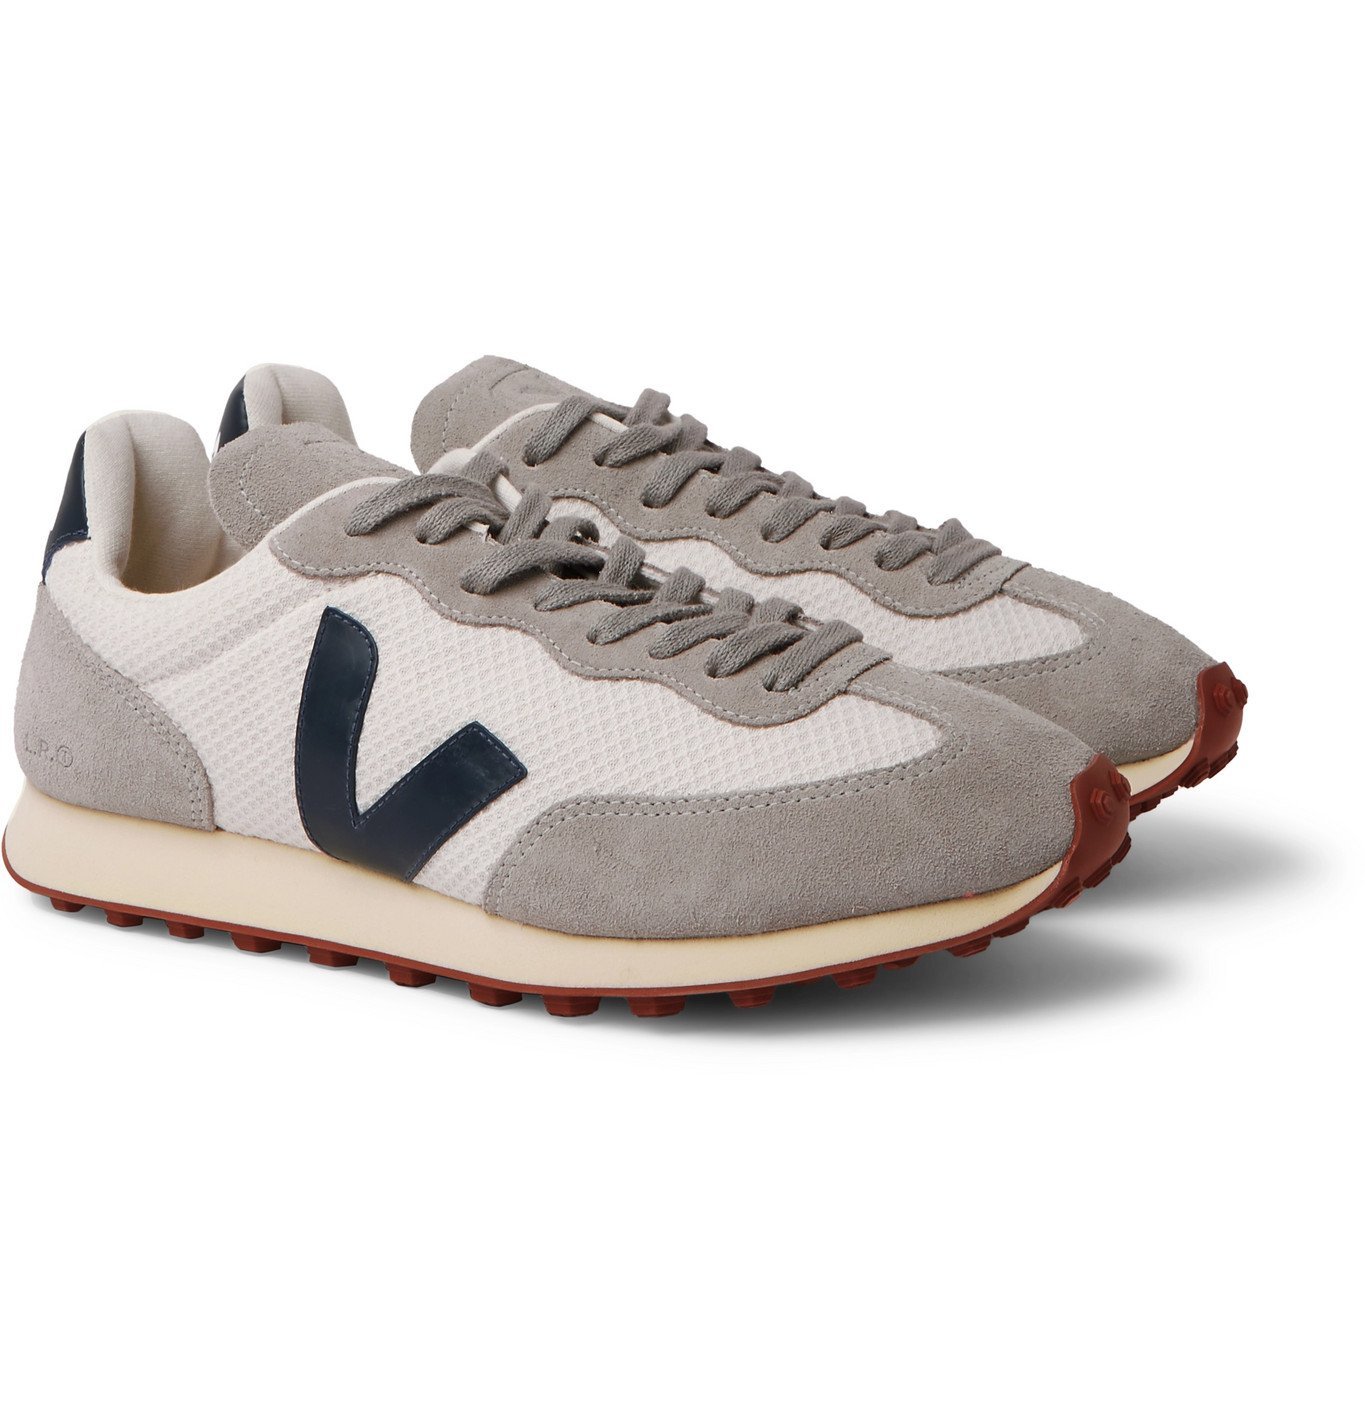 Veja - Rio Branco Leather and Rubber-Trimmed Hexamesh and Suede ...